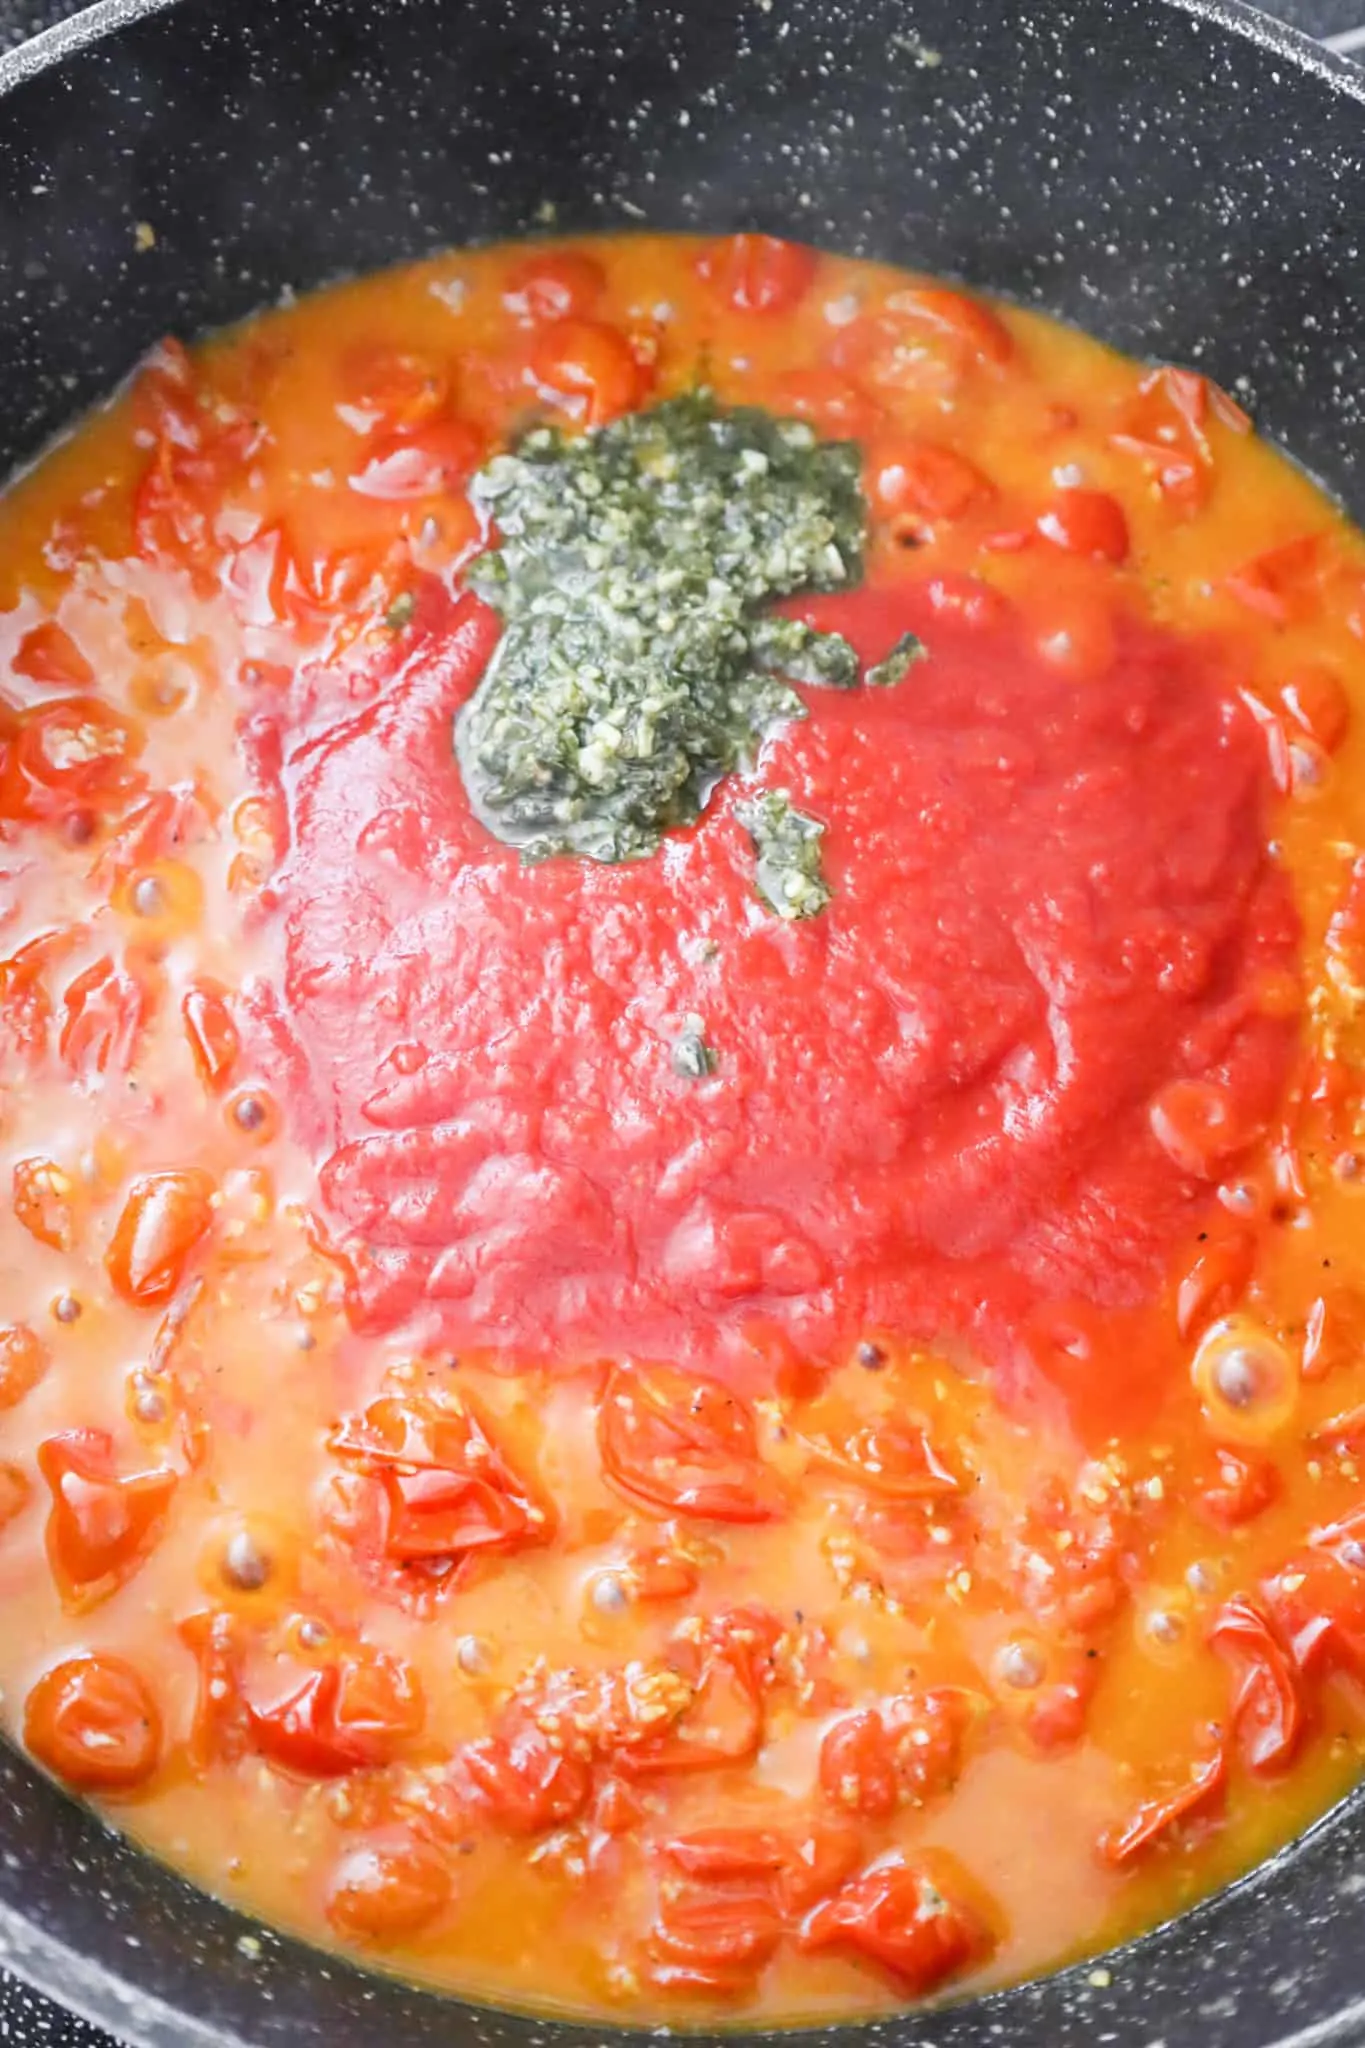 basil pesto and crushed tomatoes on top of cooked cherry tomatoes in a saute pan